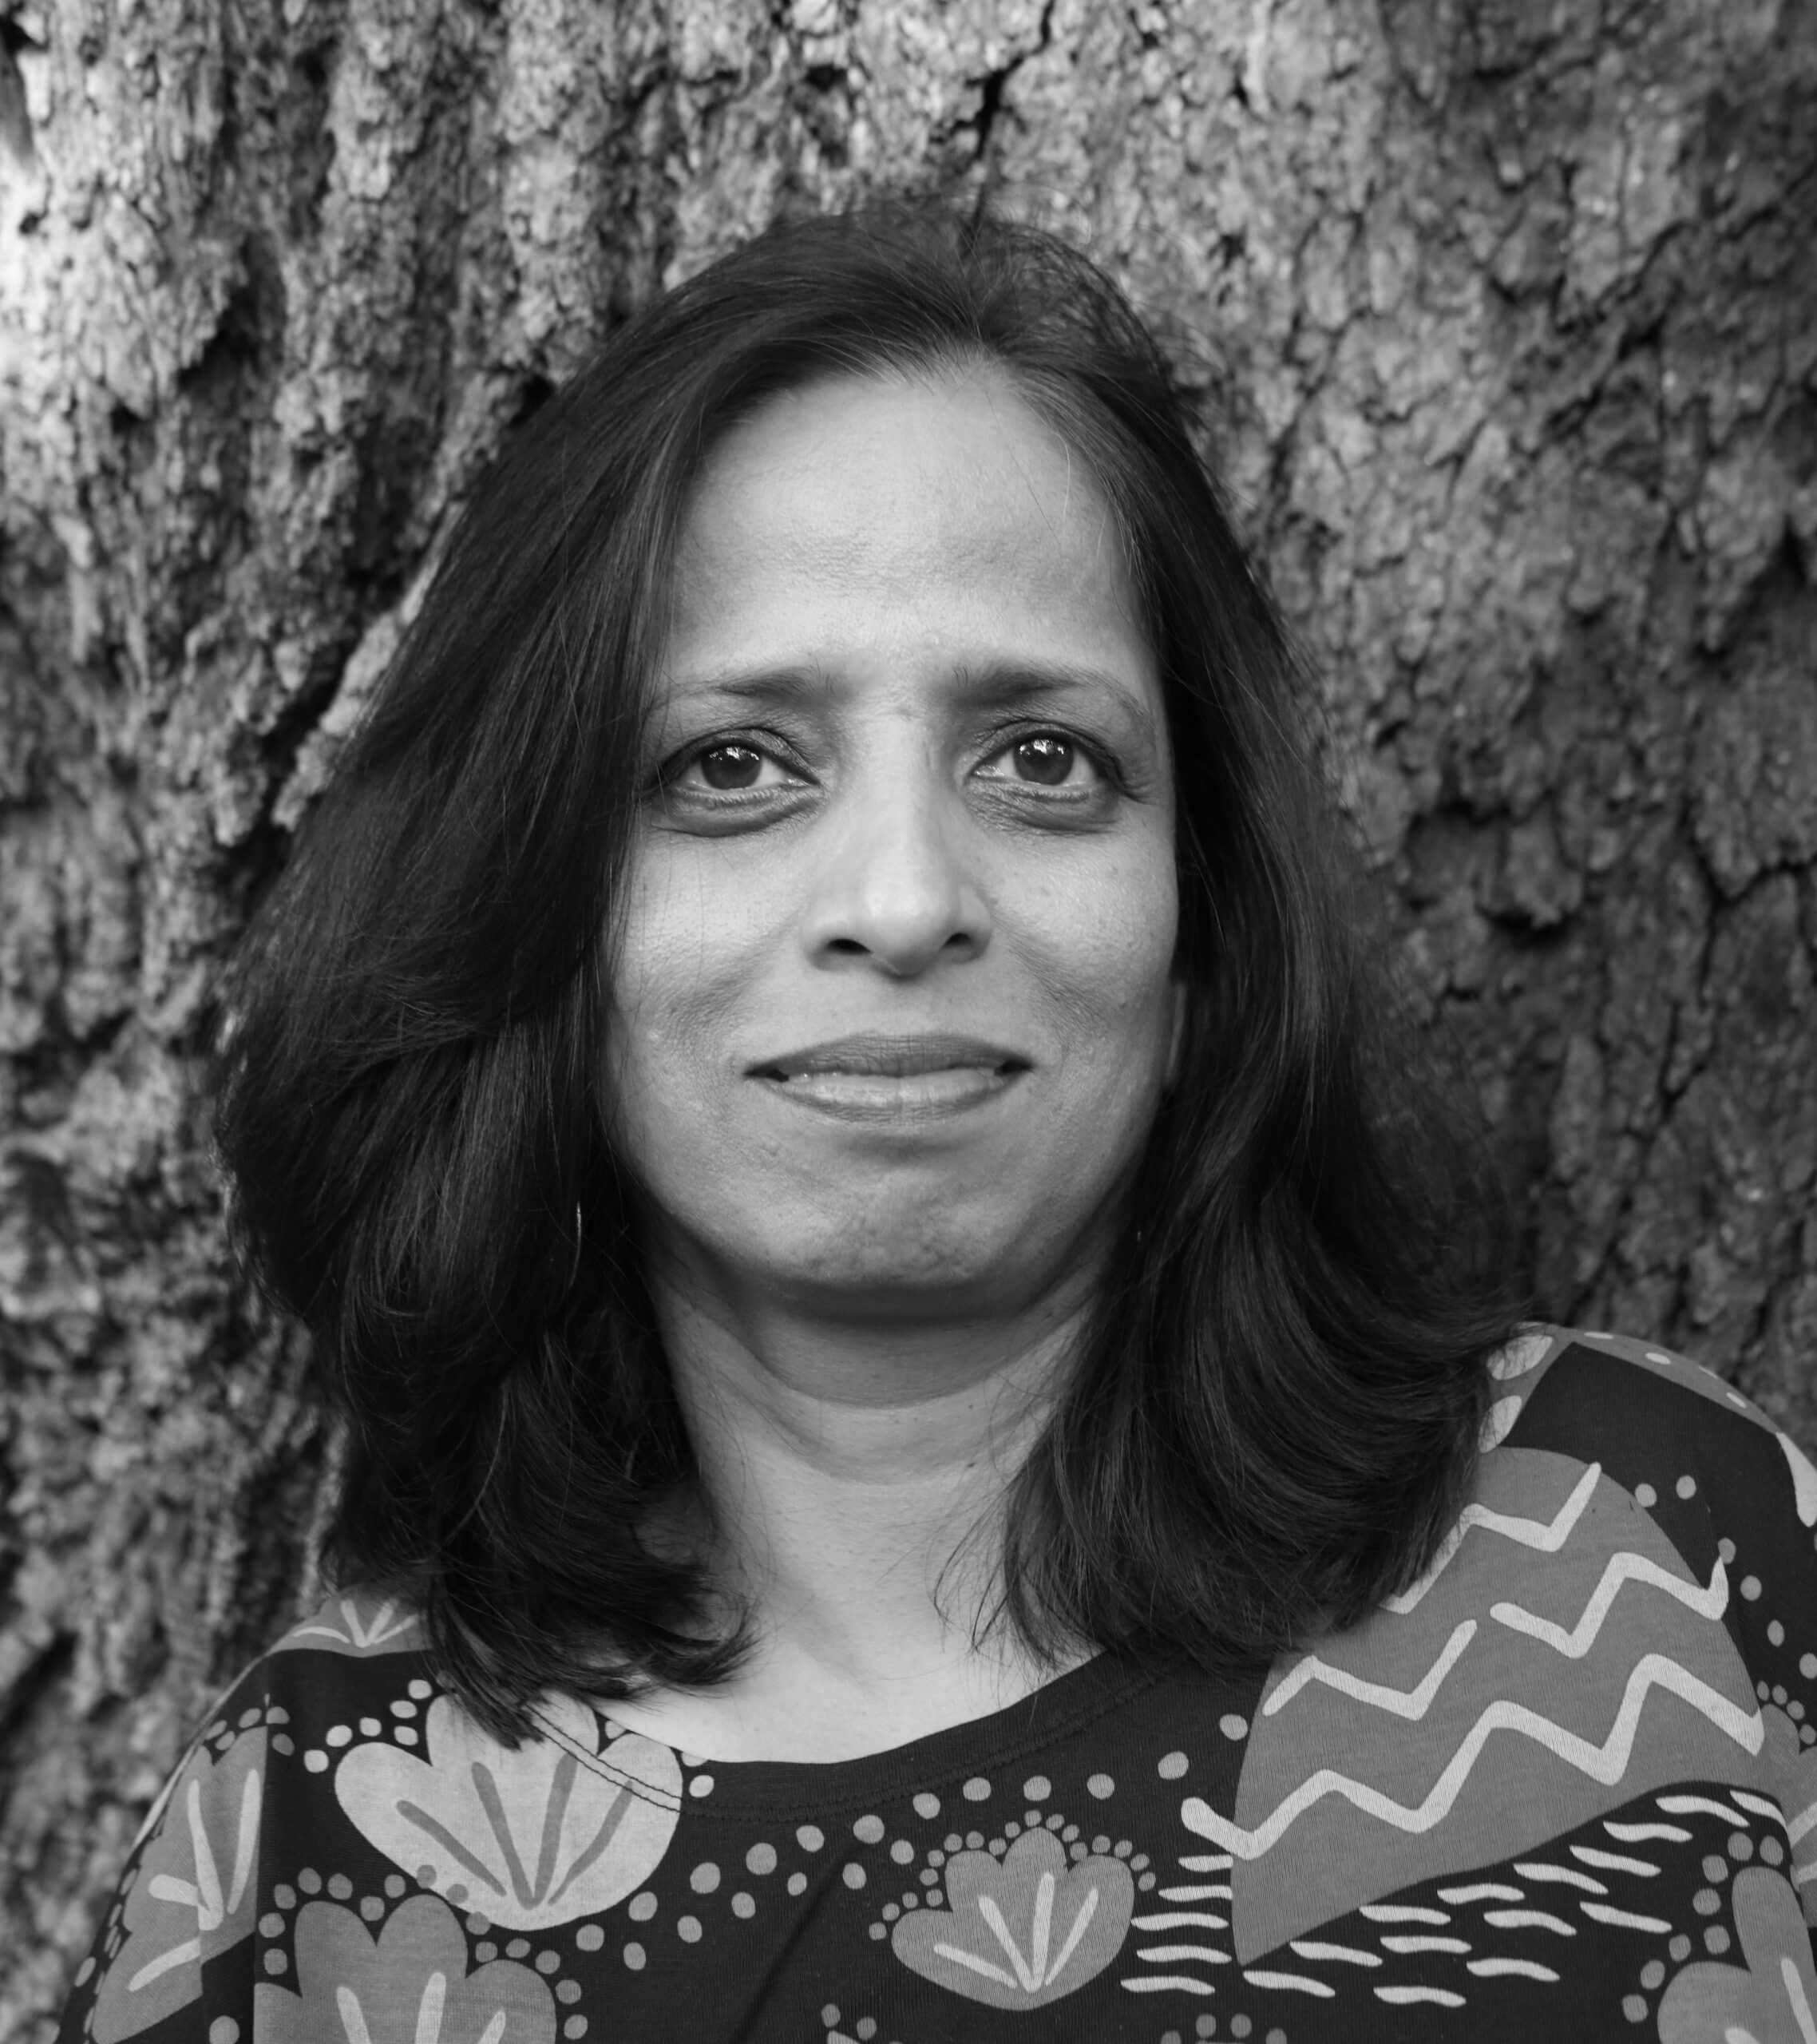 Nistha Jain stands in front of a tree. She has shoulder-length dark hair and wears a patterned blouse. Black and white portrait.